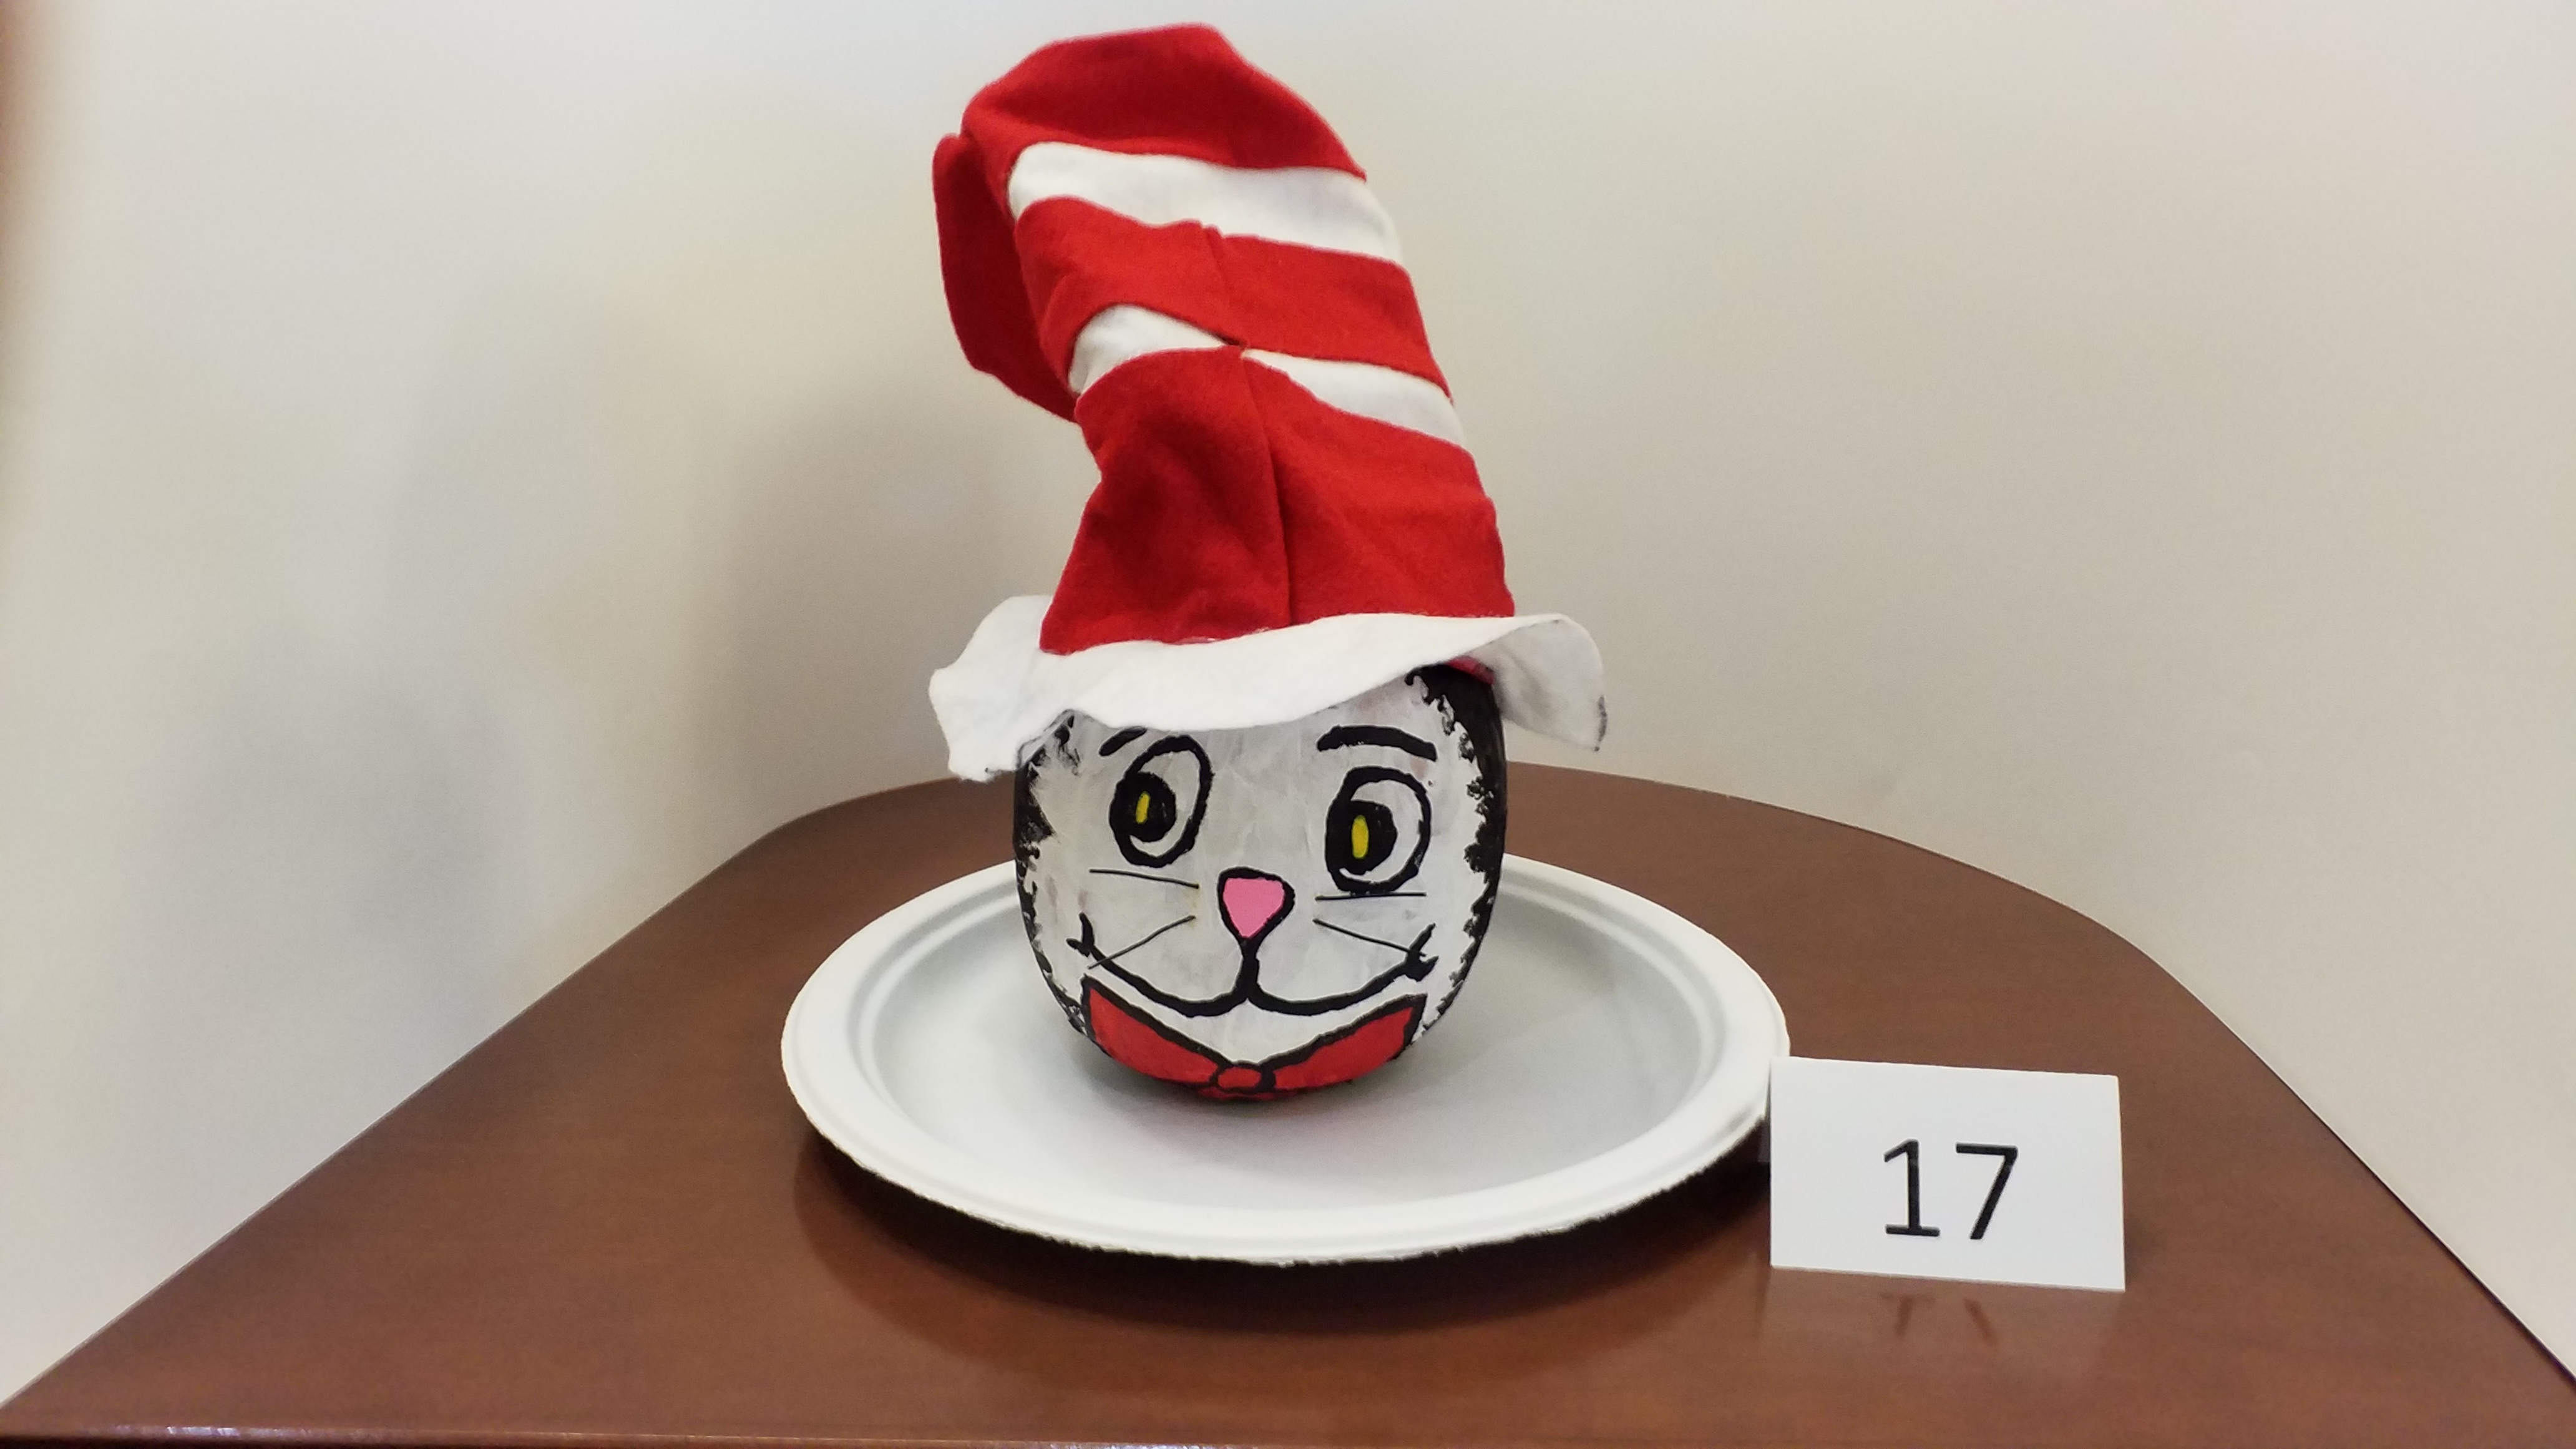 Pumpkin decorated as the Cat in the Hat